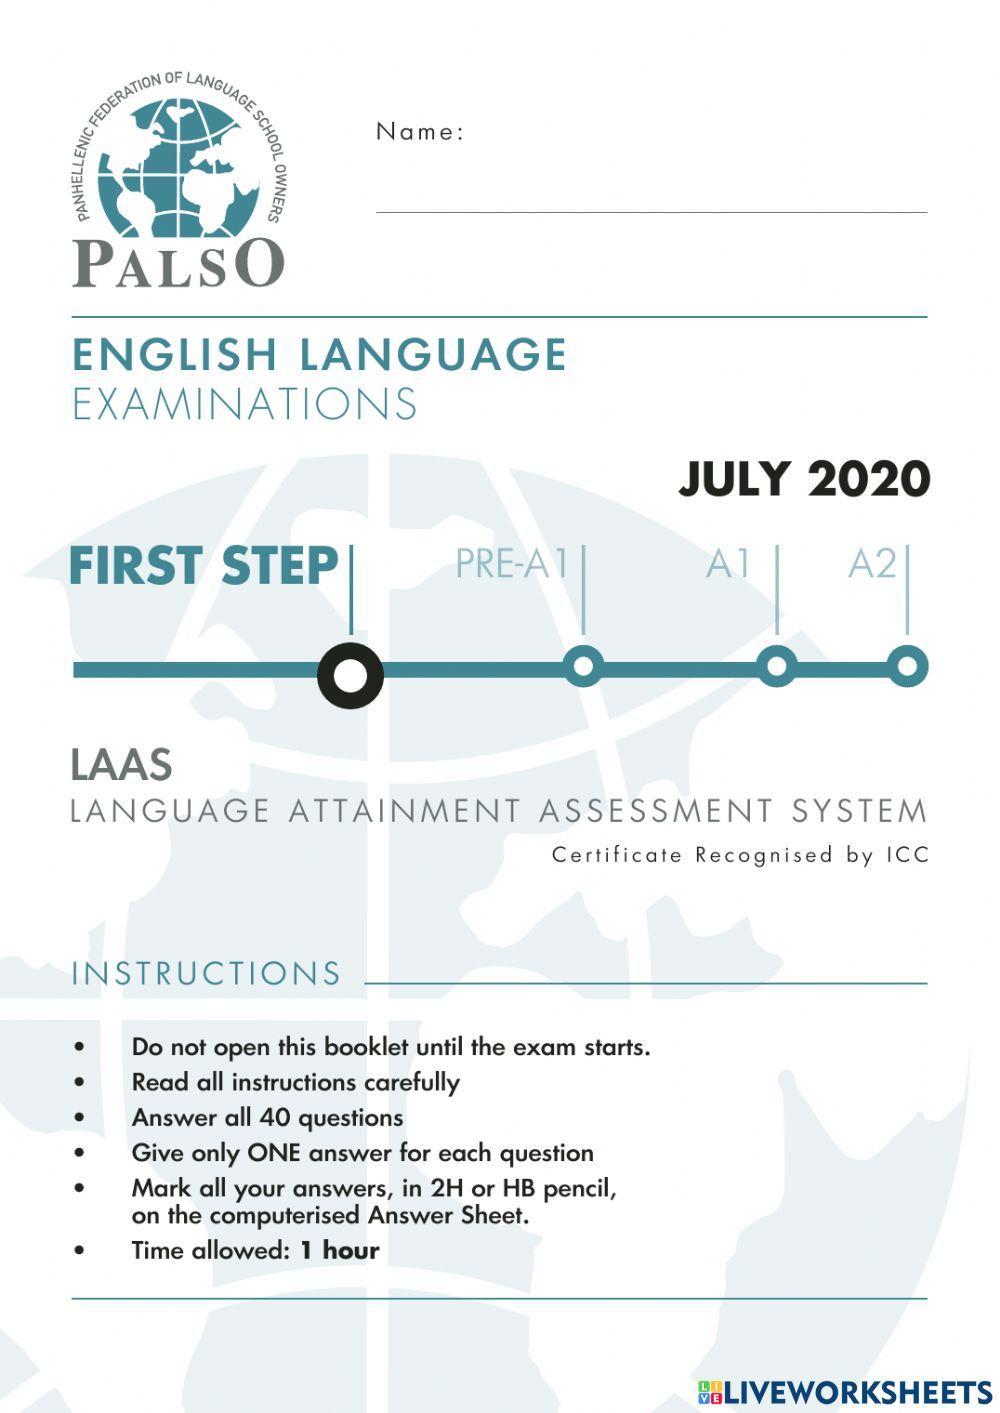 NEW REFORMED Palso LAAS first step 2020